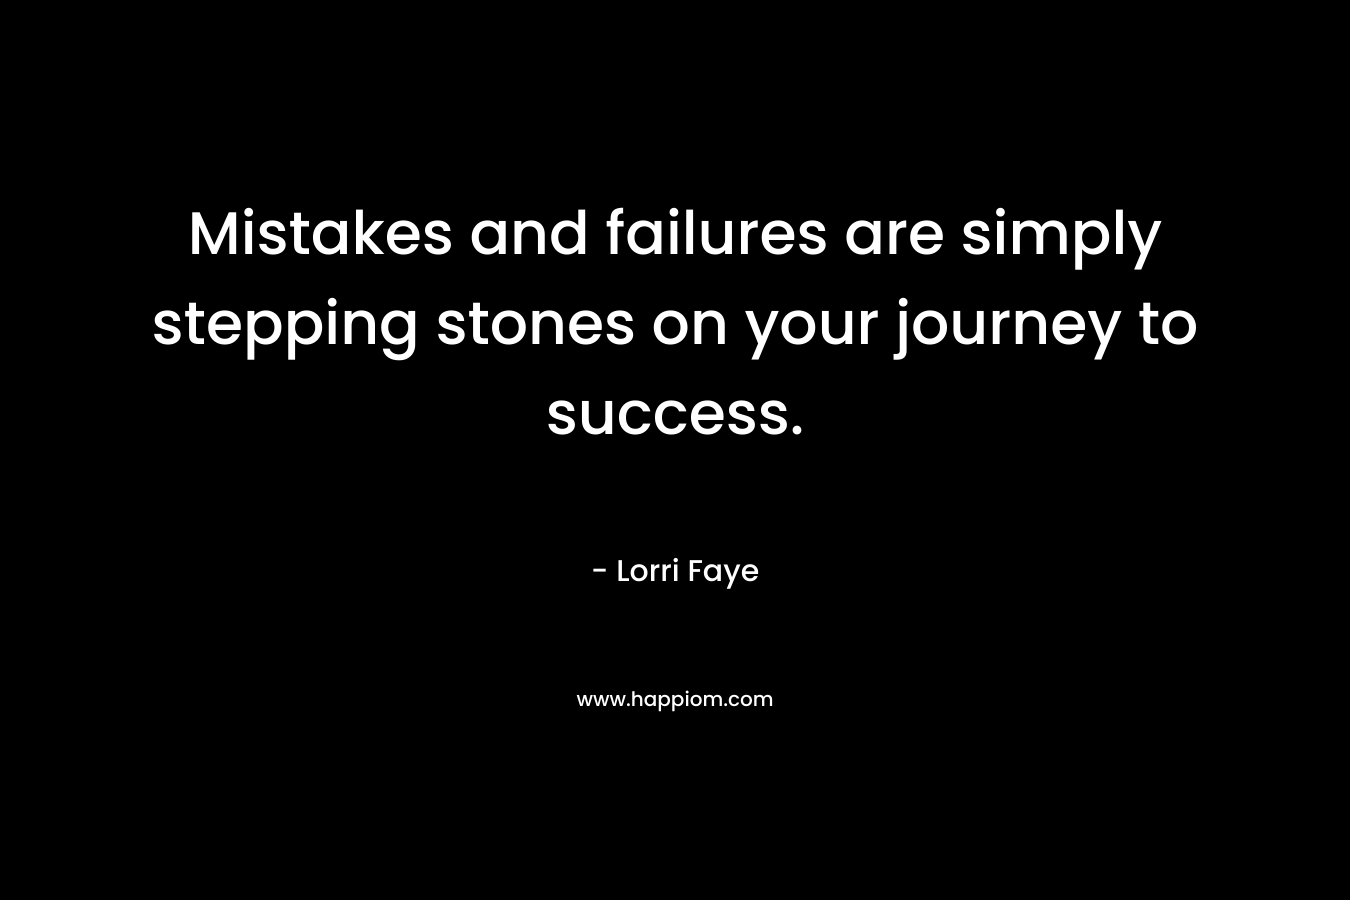 Mistakes and failures are simply stepping stones on your journey to success.